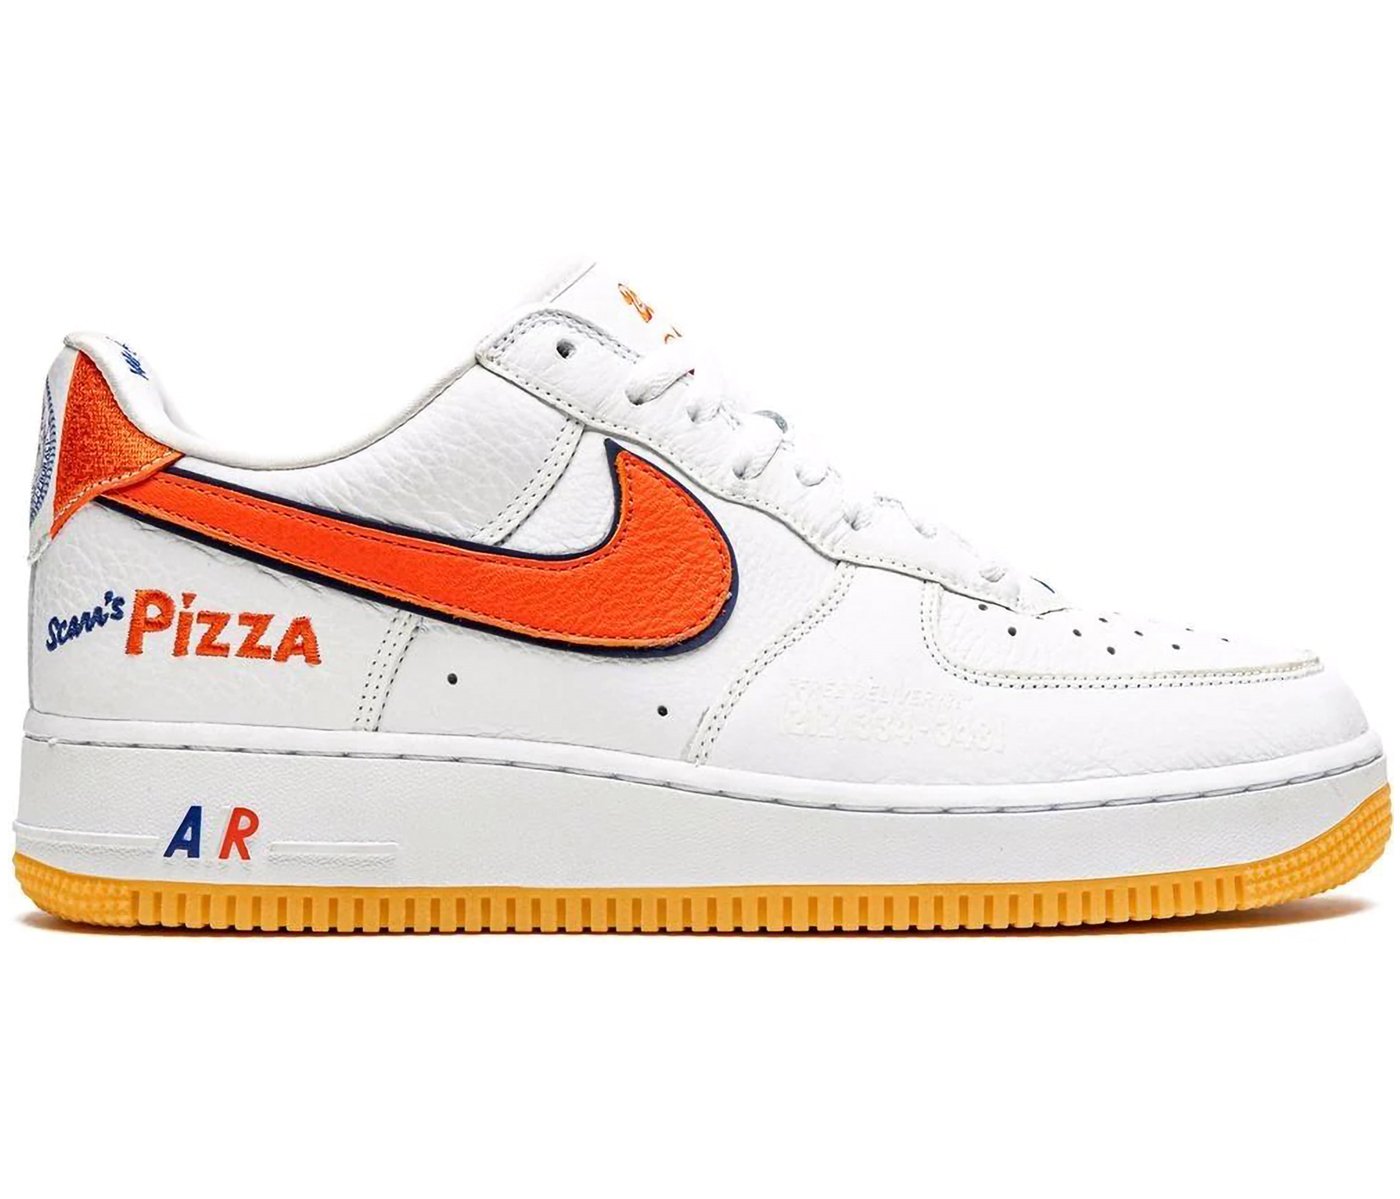 Nike Air Force 1 Low Scarr's Pizza sneaker informations